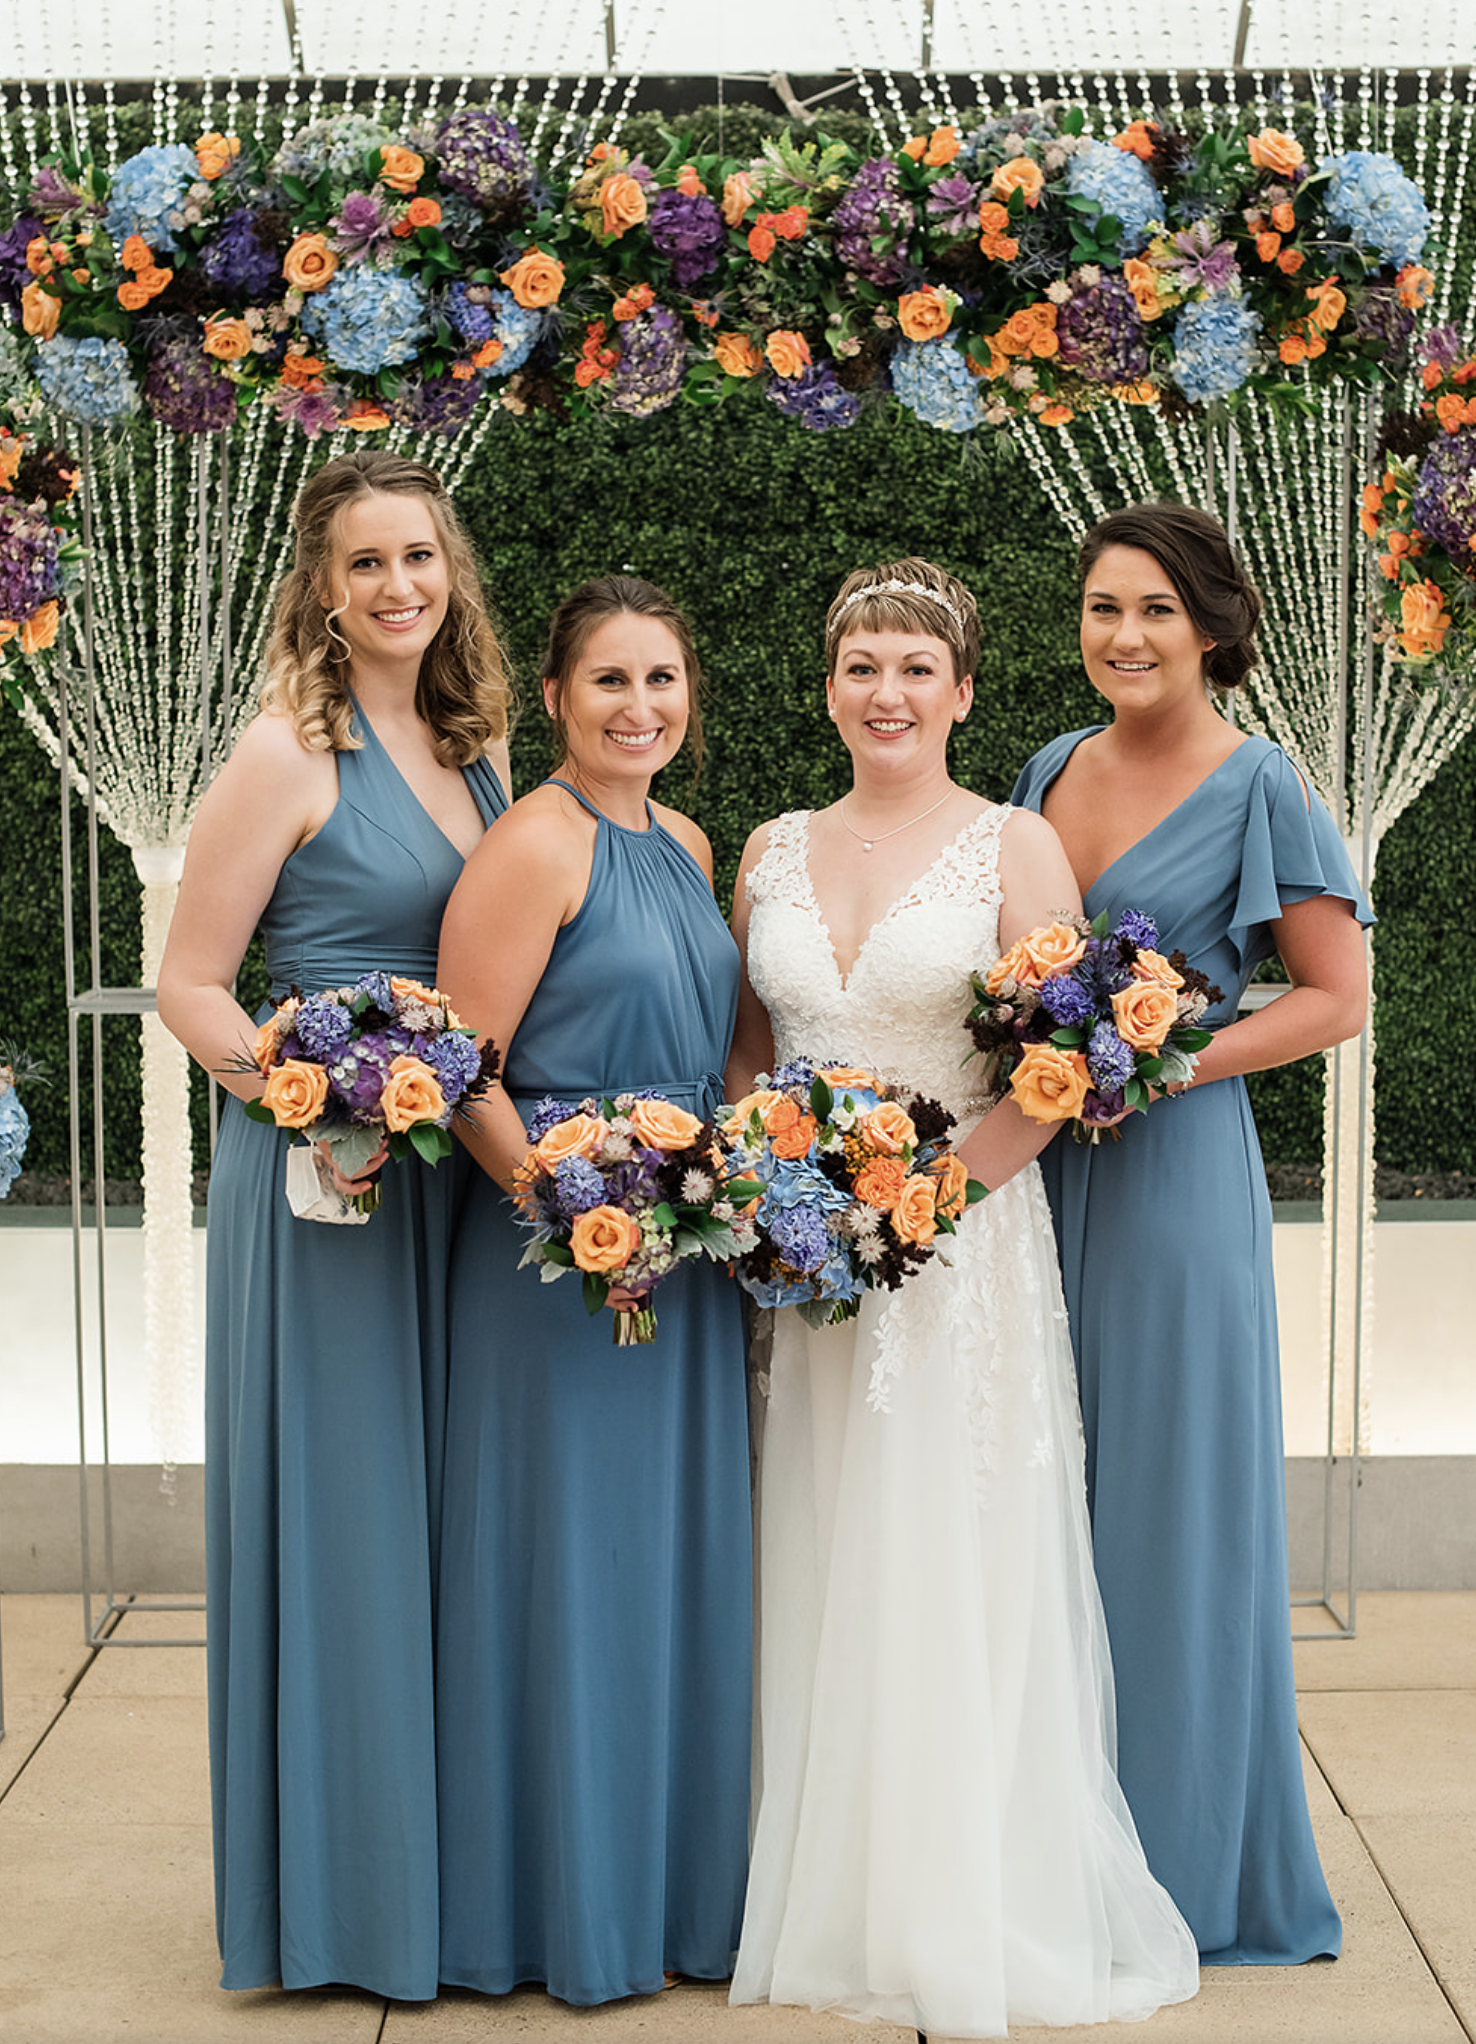 The bride smiles with her bridesmaids beside her at the Sam Houston Hotel at the Veranda